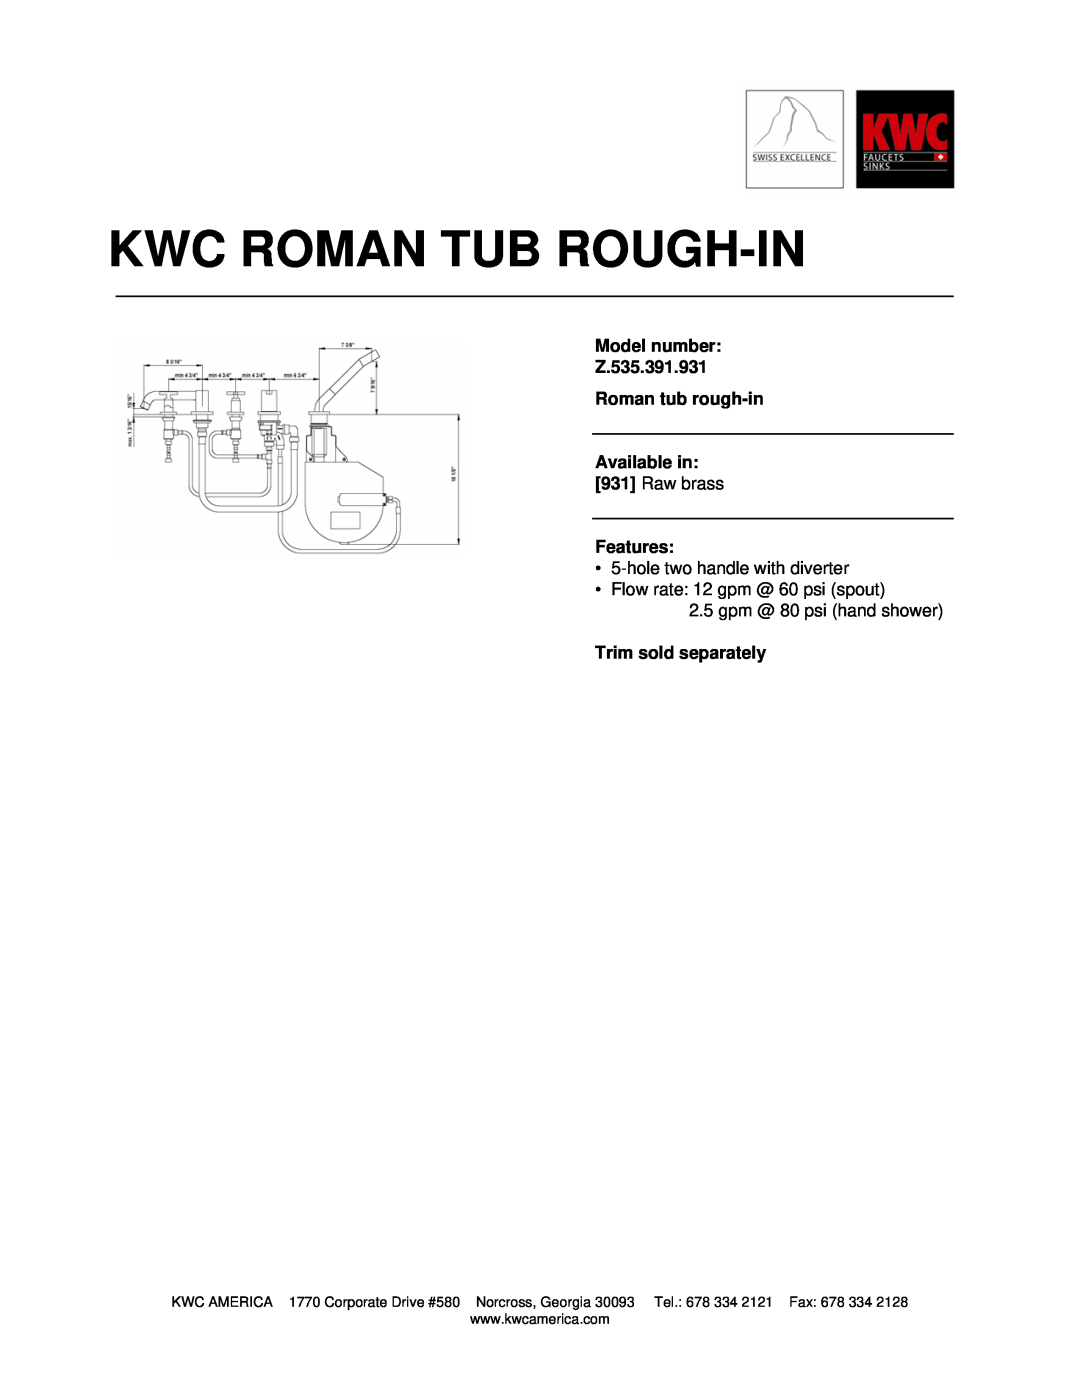 KWC manual Kwc Roman Tub Rough-In, Model number Z.535.391.931 Roman tub rough-in, Available in, Raw brass, Features 